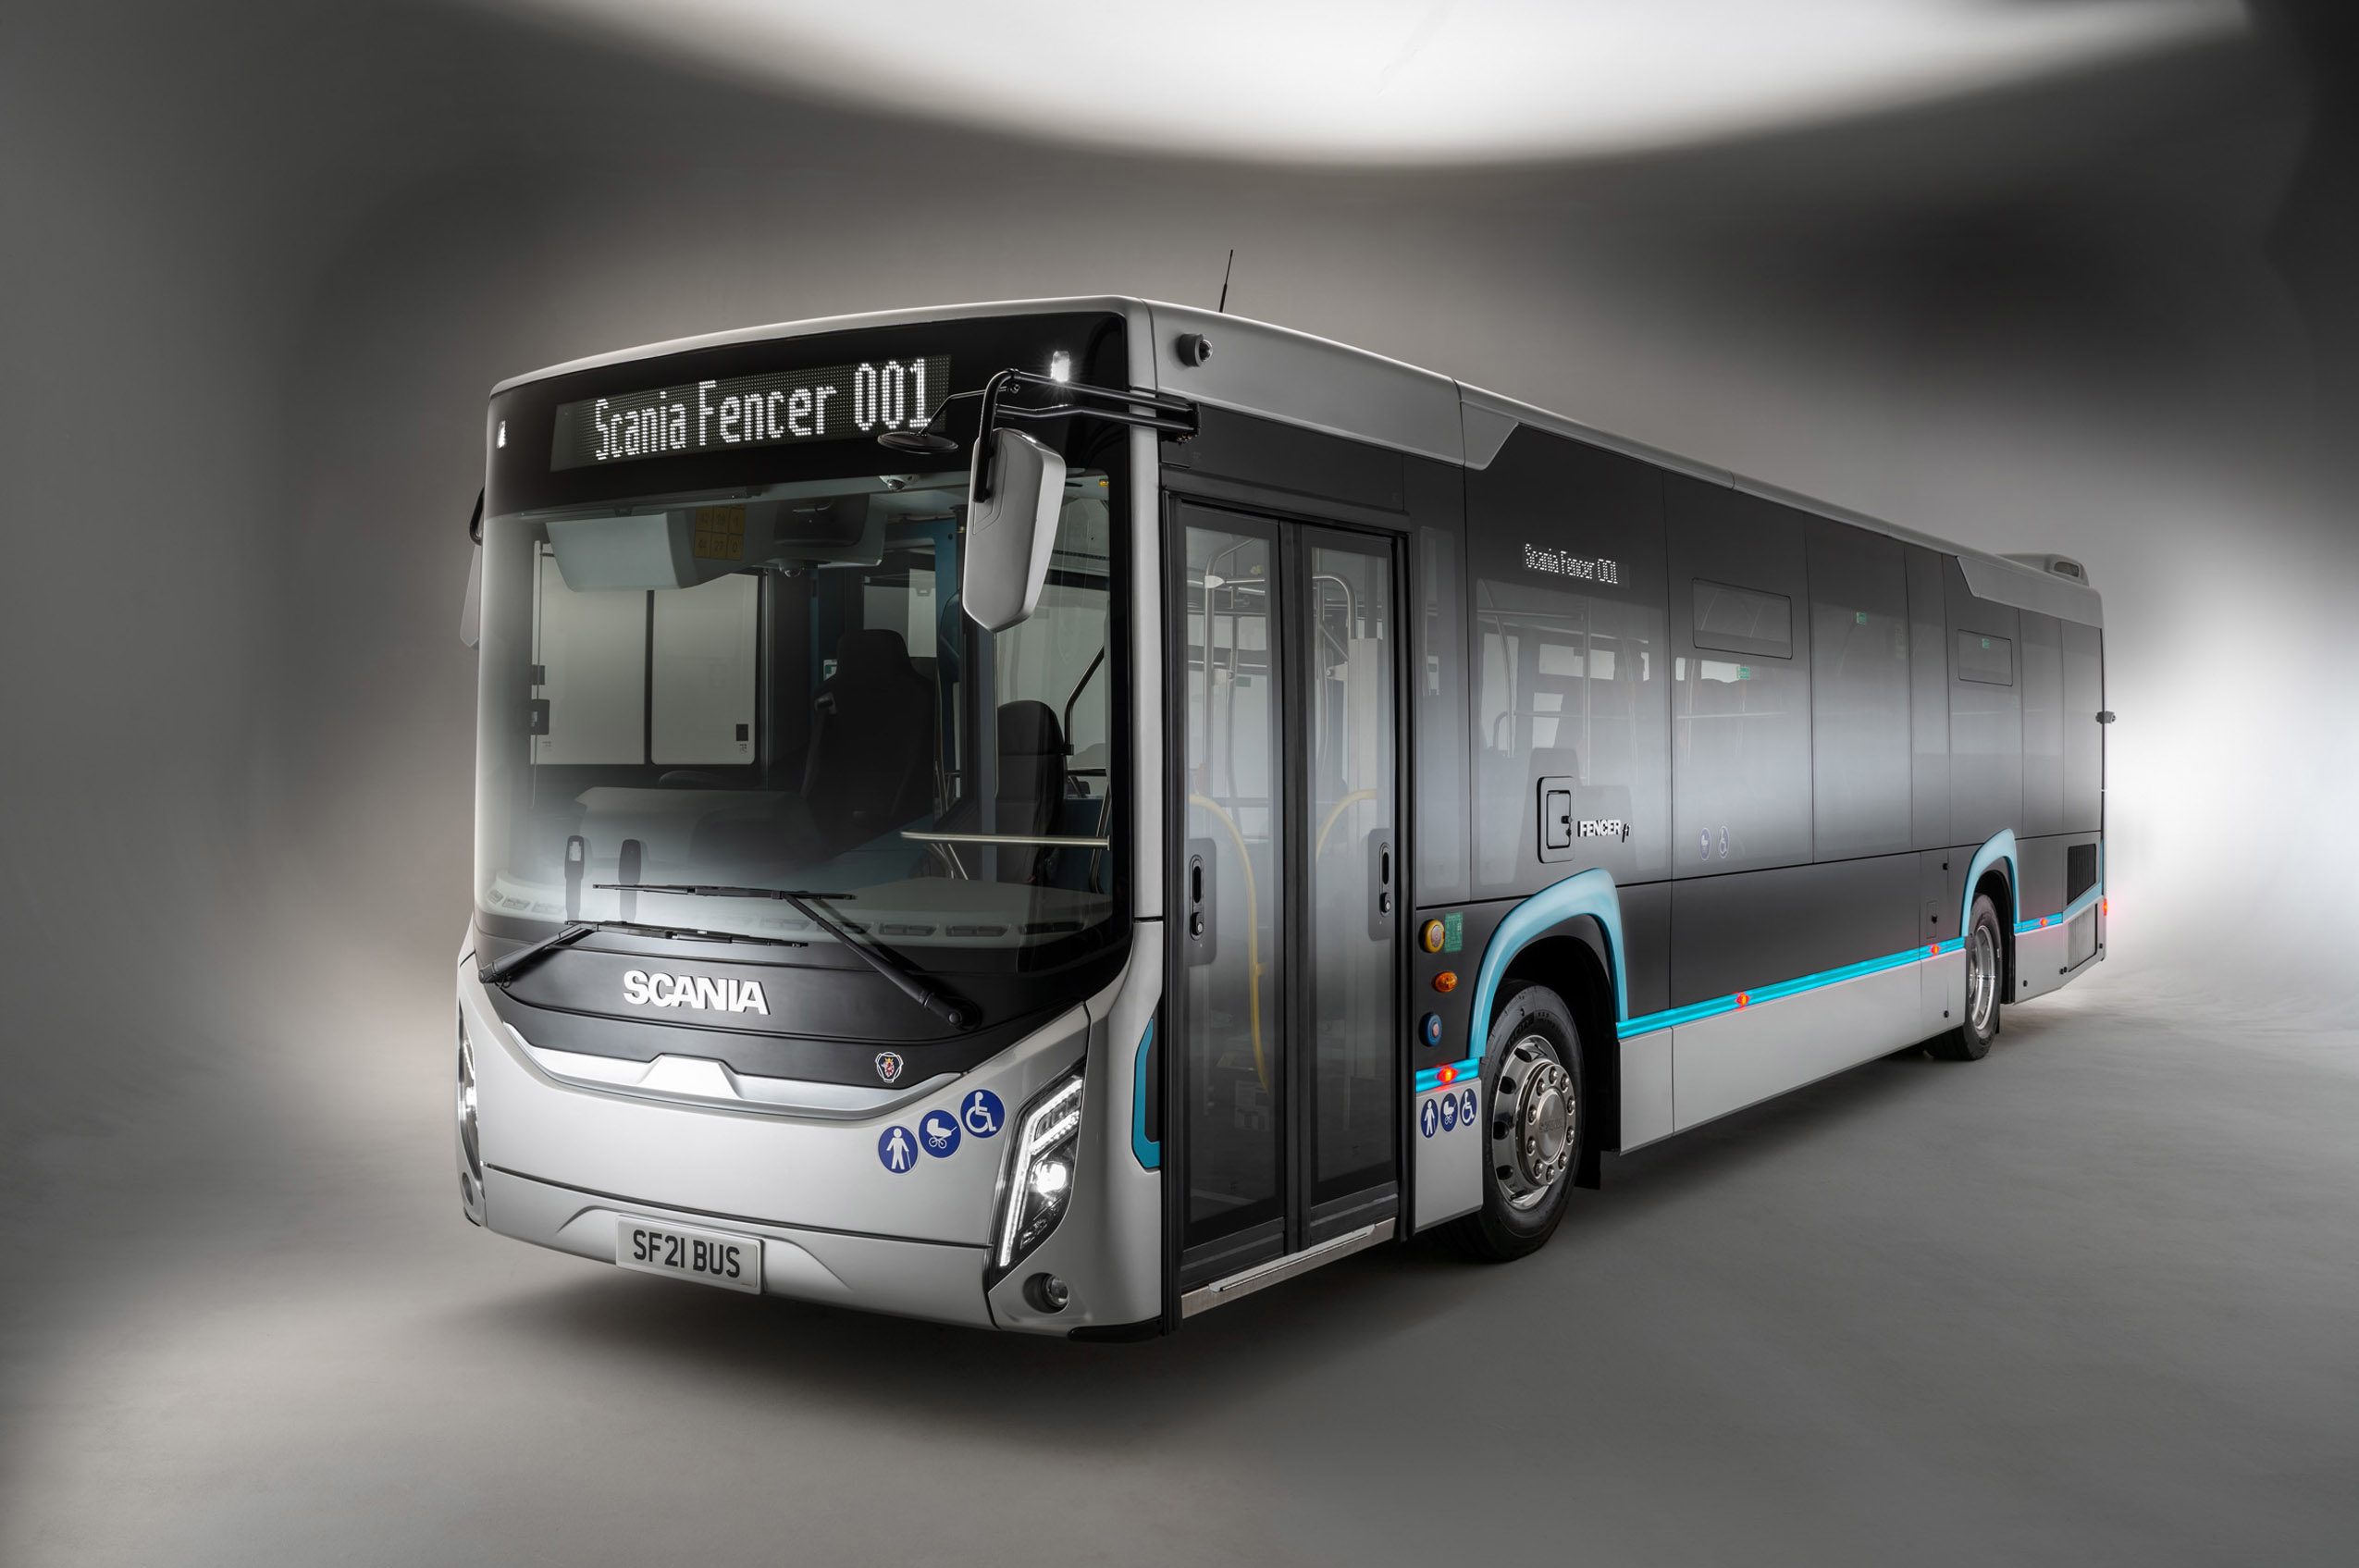 Scania launches Fencer bus range